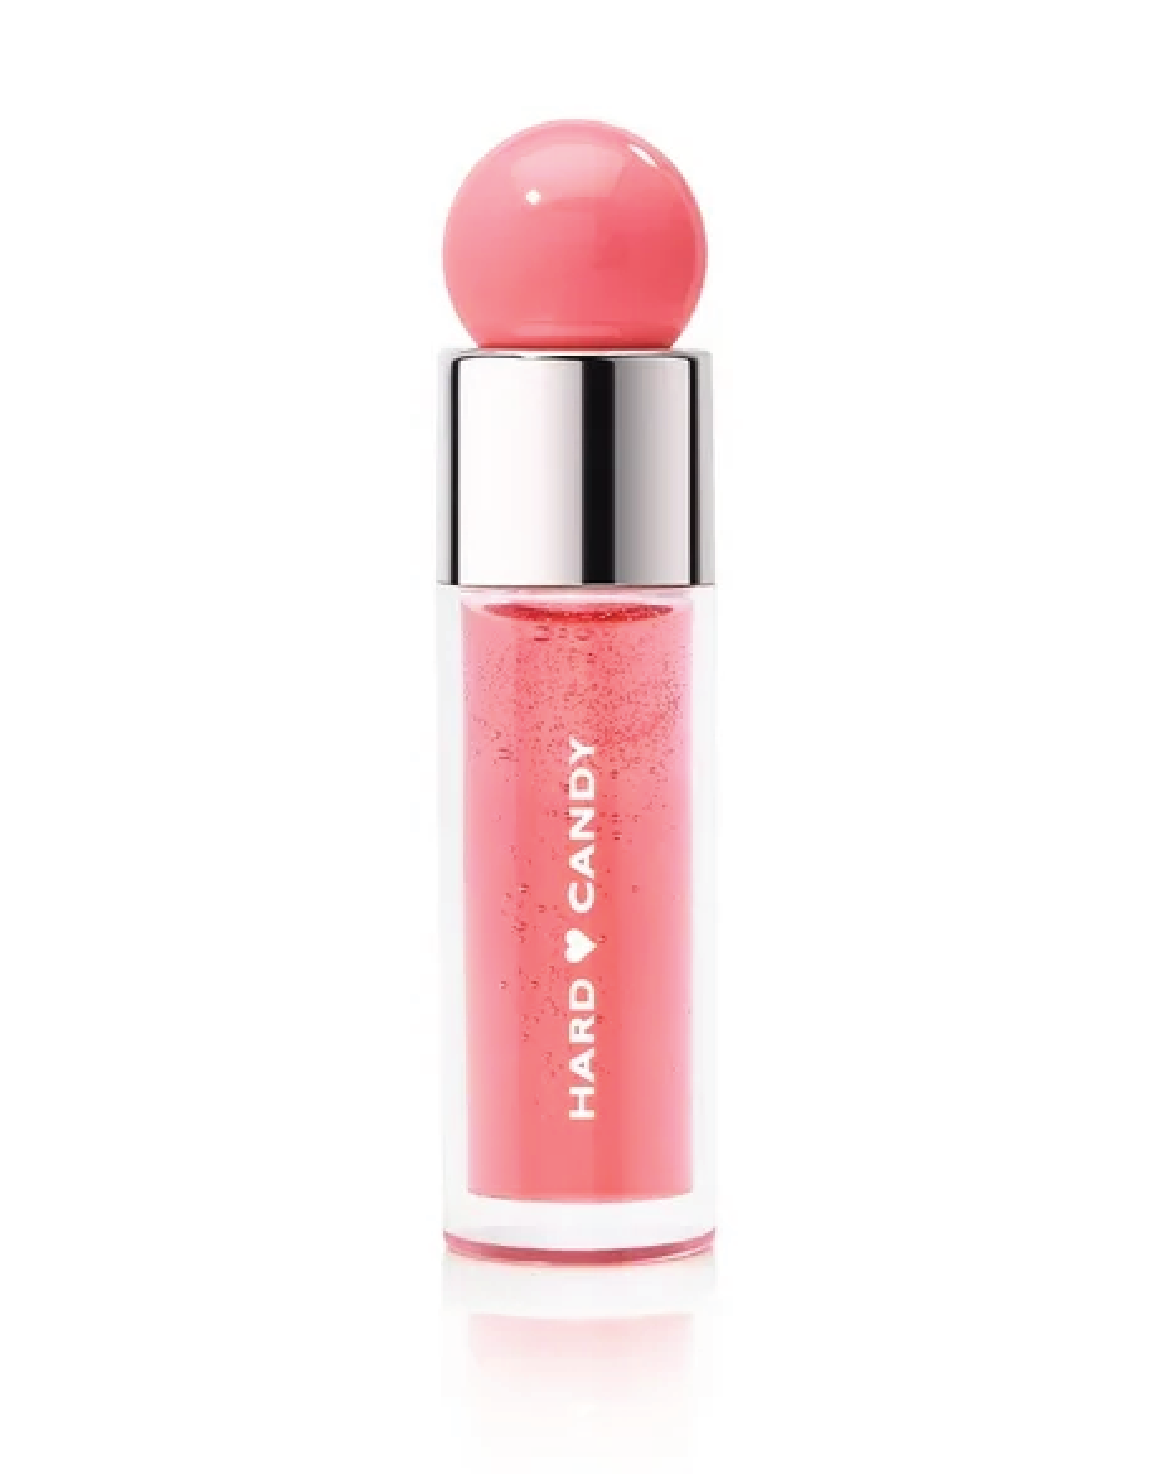 lip gloss with a lid that looks like a bubble